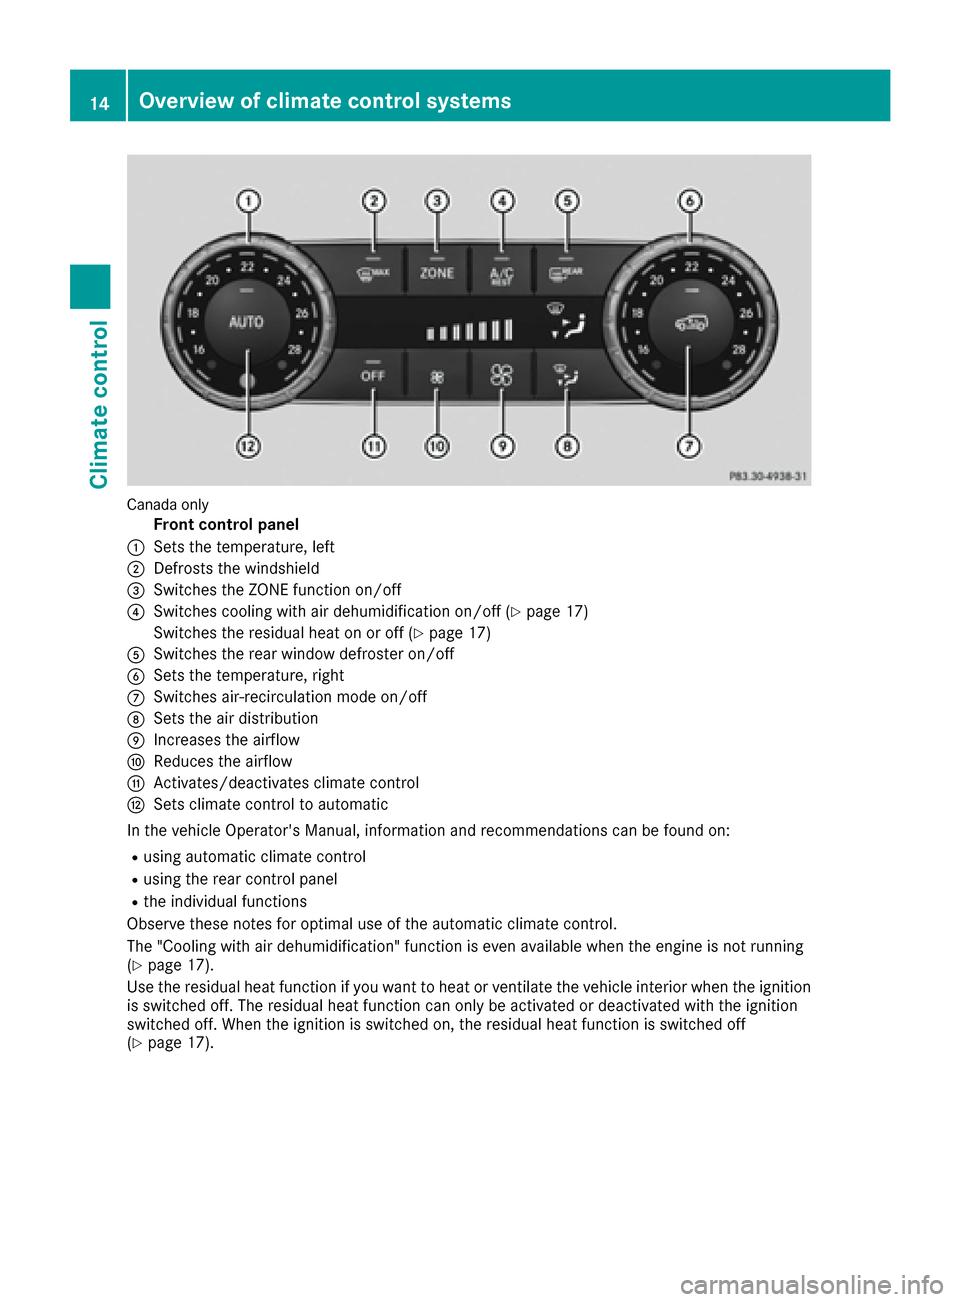 MERCEDES-BENZ GLE SUV HYBRID 2017 W166 Owners Manual Canada only
Front control panel
:Sets the temperature, left
;Defrosts the windshield
=Switches the ZONE function on/off
?Switches cooling with air dehumidification on/off (Ypage 17)
Switches the resid